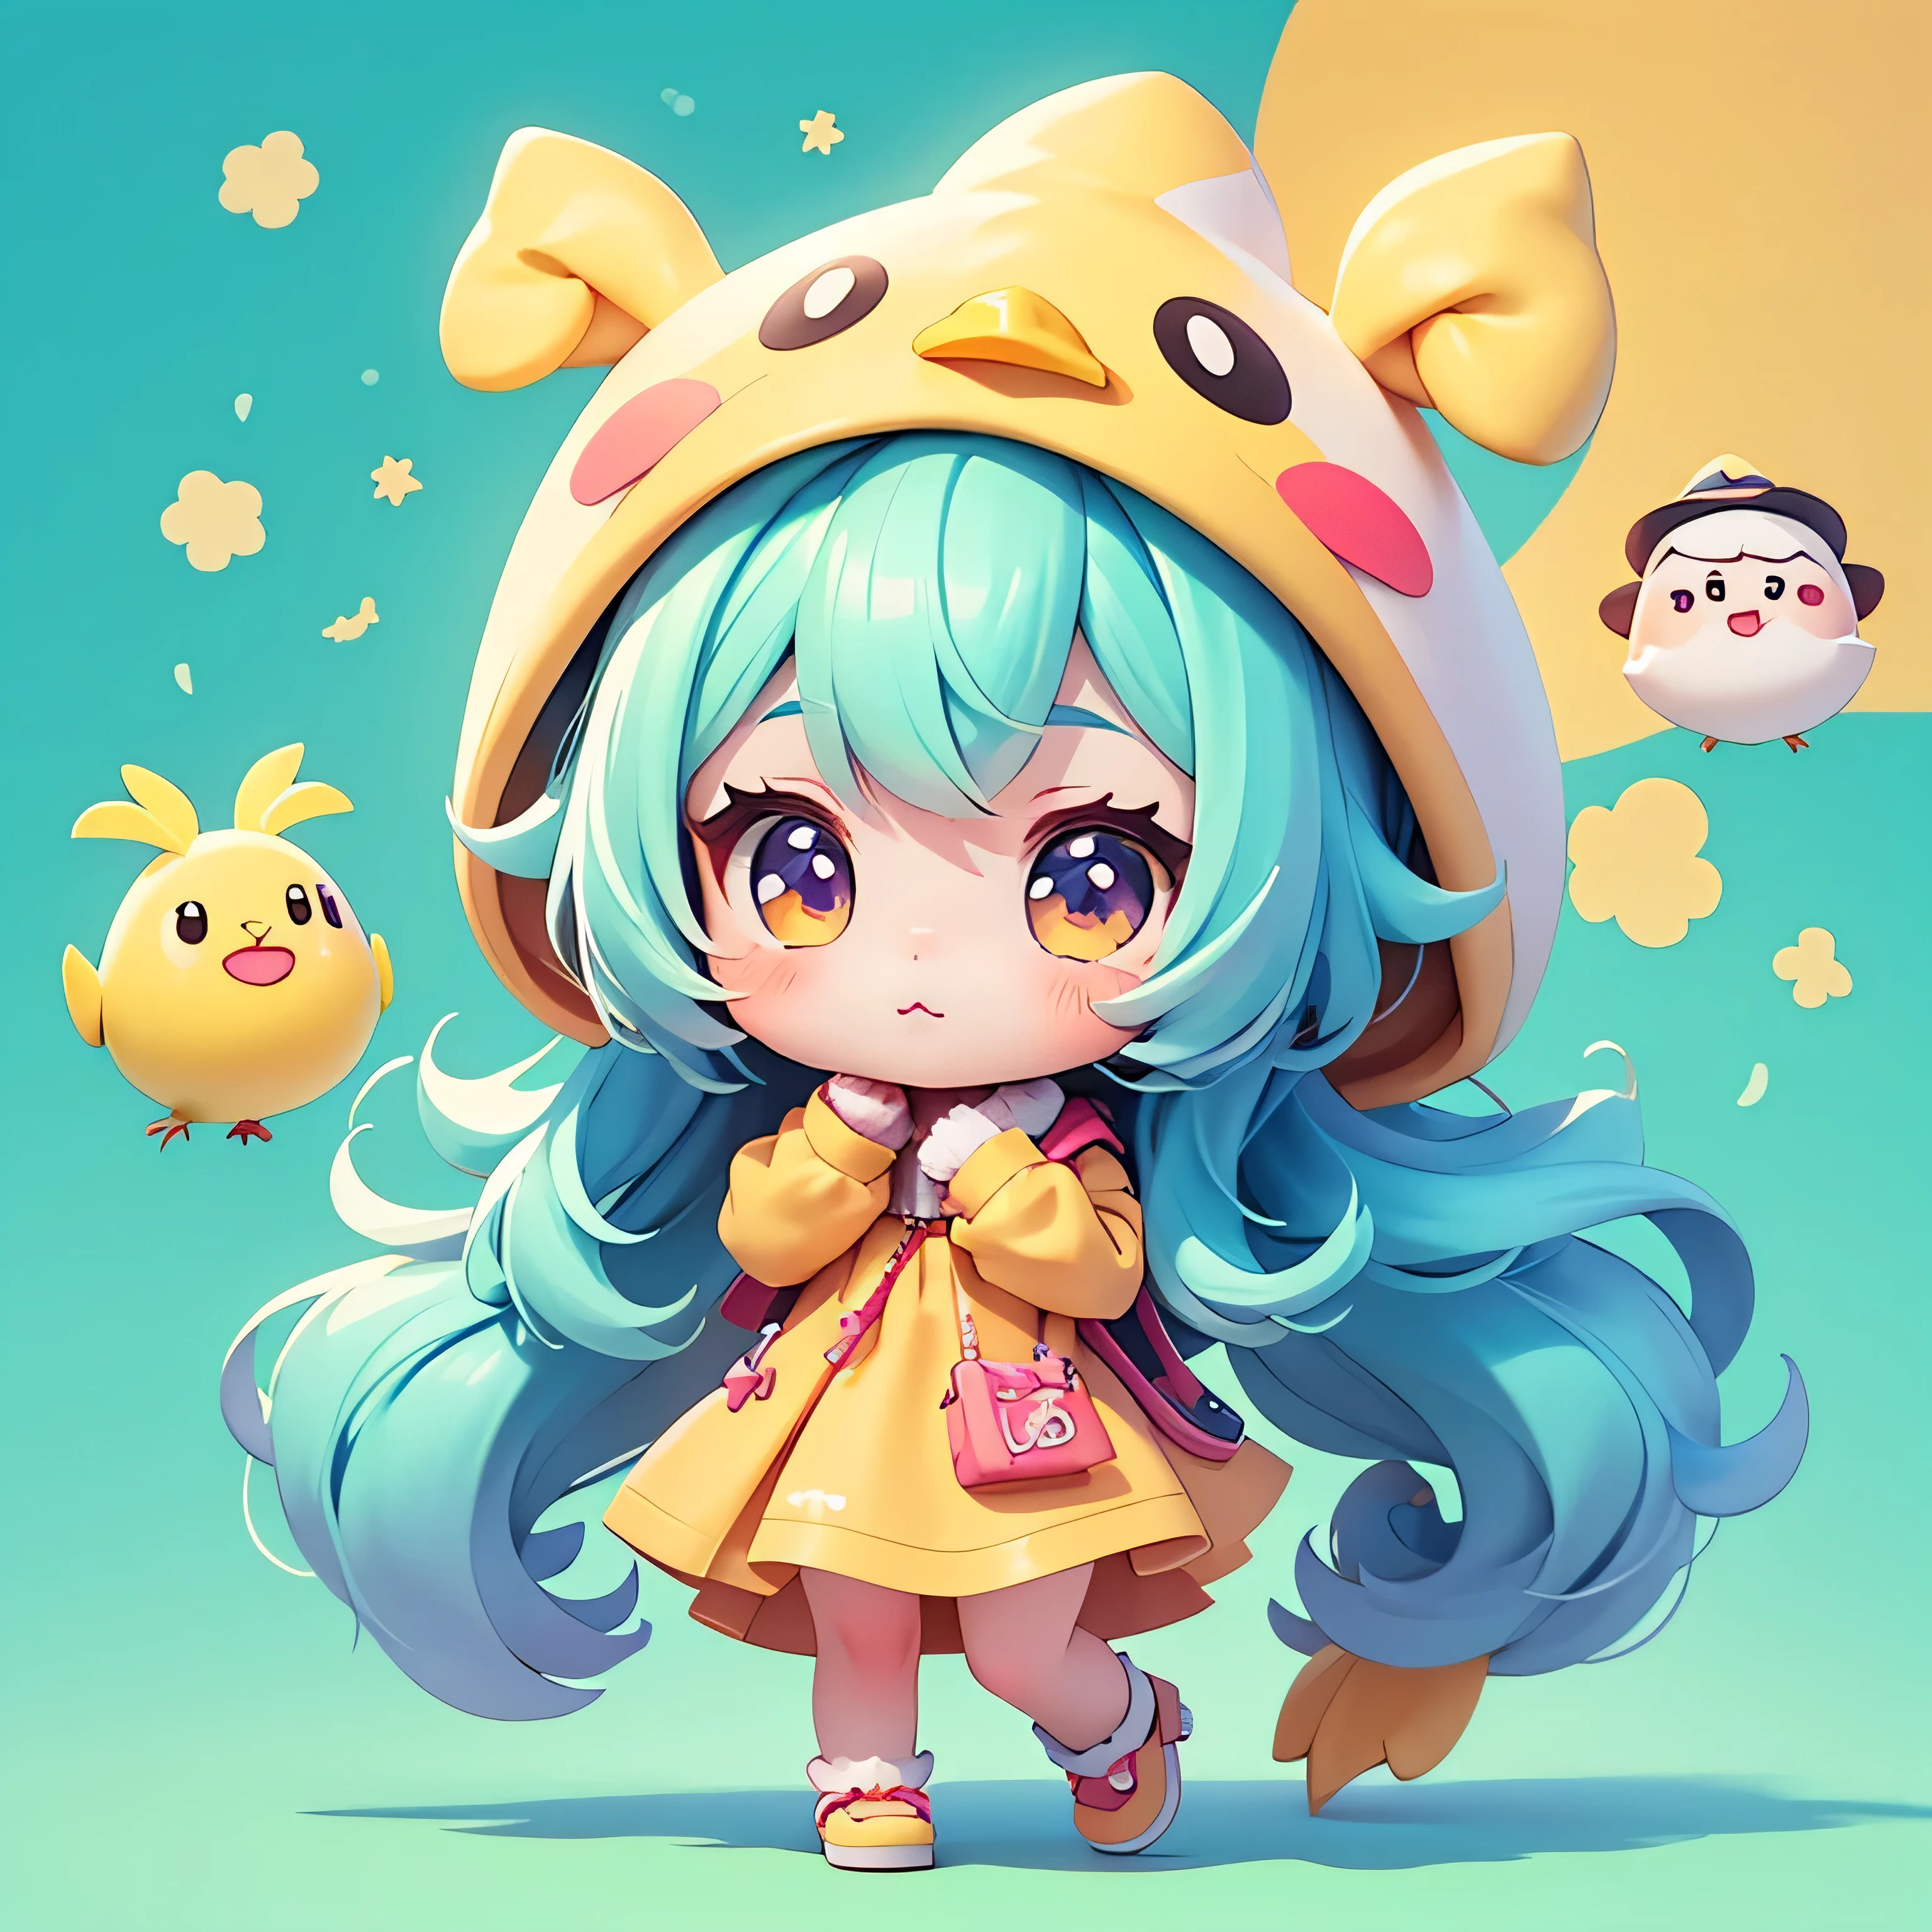 The characters to wantest to kiss. The character clasps his hands in pleading. , cartoon girl in a chicken costume with a hat and a hand,  kawaii cutest sticker ever, cute digital art, chibi girl, cute anime style, cute detailed digital art, anime chibi, cute anime girl, chibi anime girl, ruan cute vtuber, sticker illustration